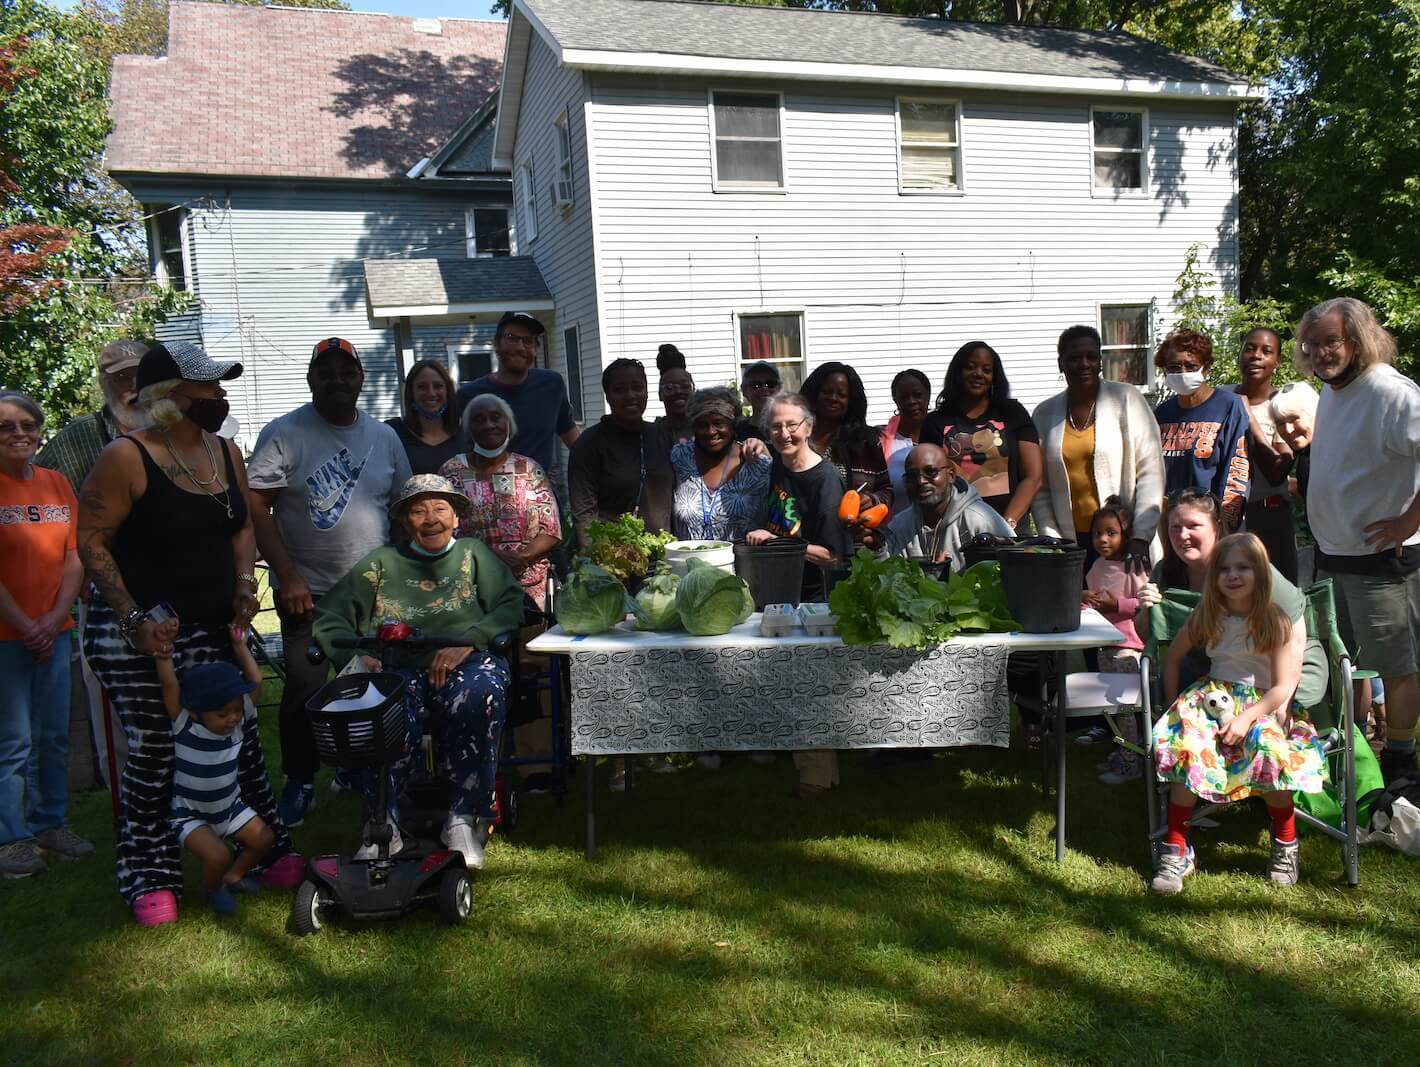 A photograph of the garden members at their 25th year celebration of the 341 Midland Ave Community Garden.